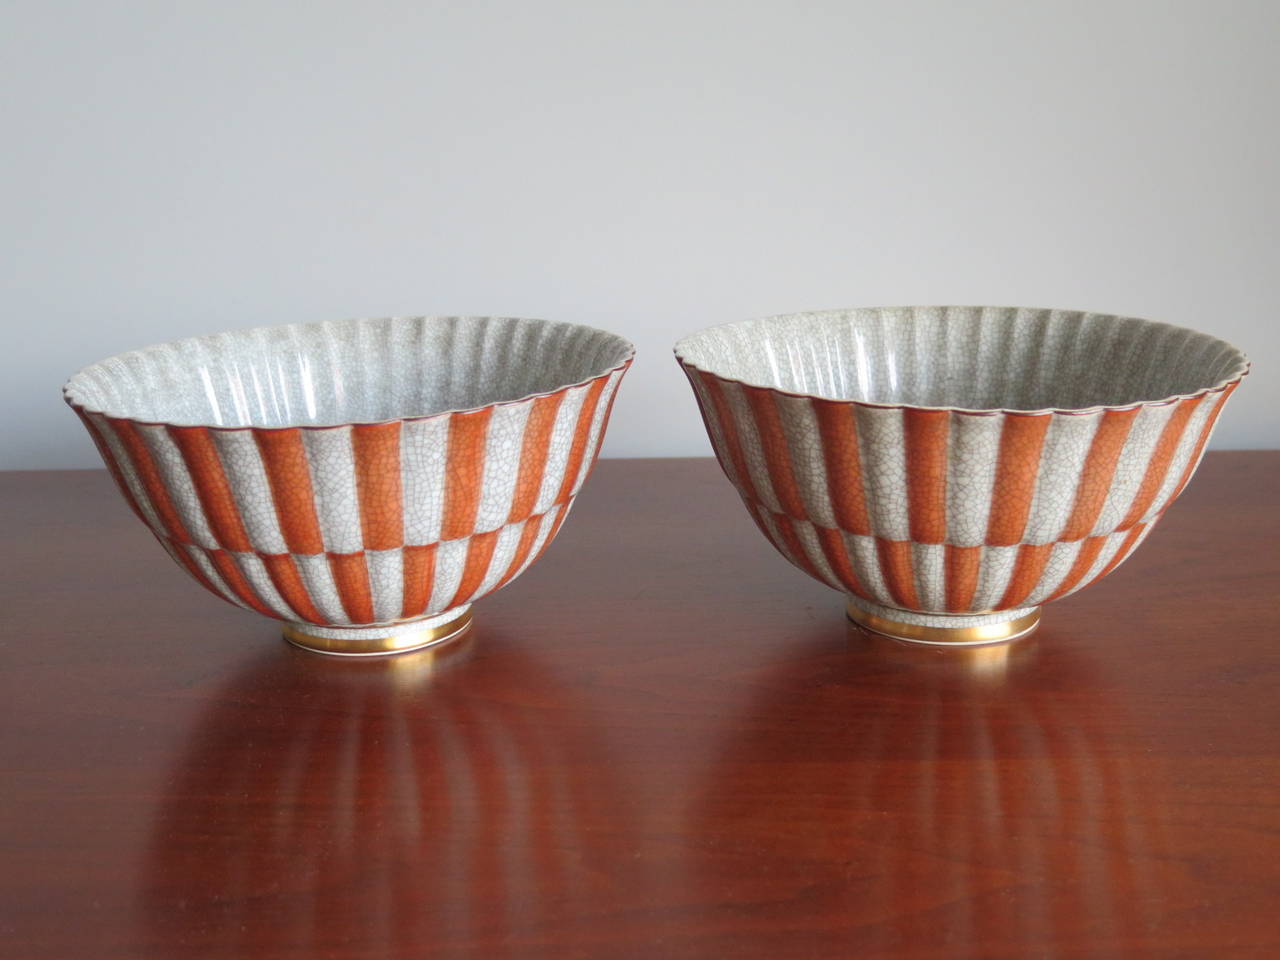 A pair of elegant, crackle glaze ceramic bowls by Royal Copenhagen, Denmark, circa 1940s. Coral and light gray deco pattern with gold details.